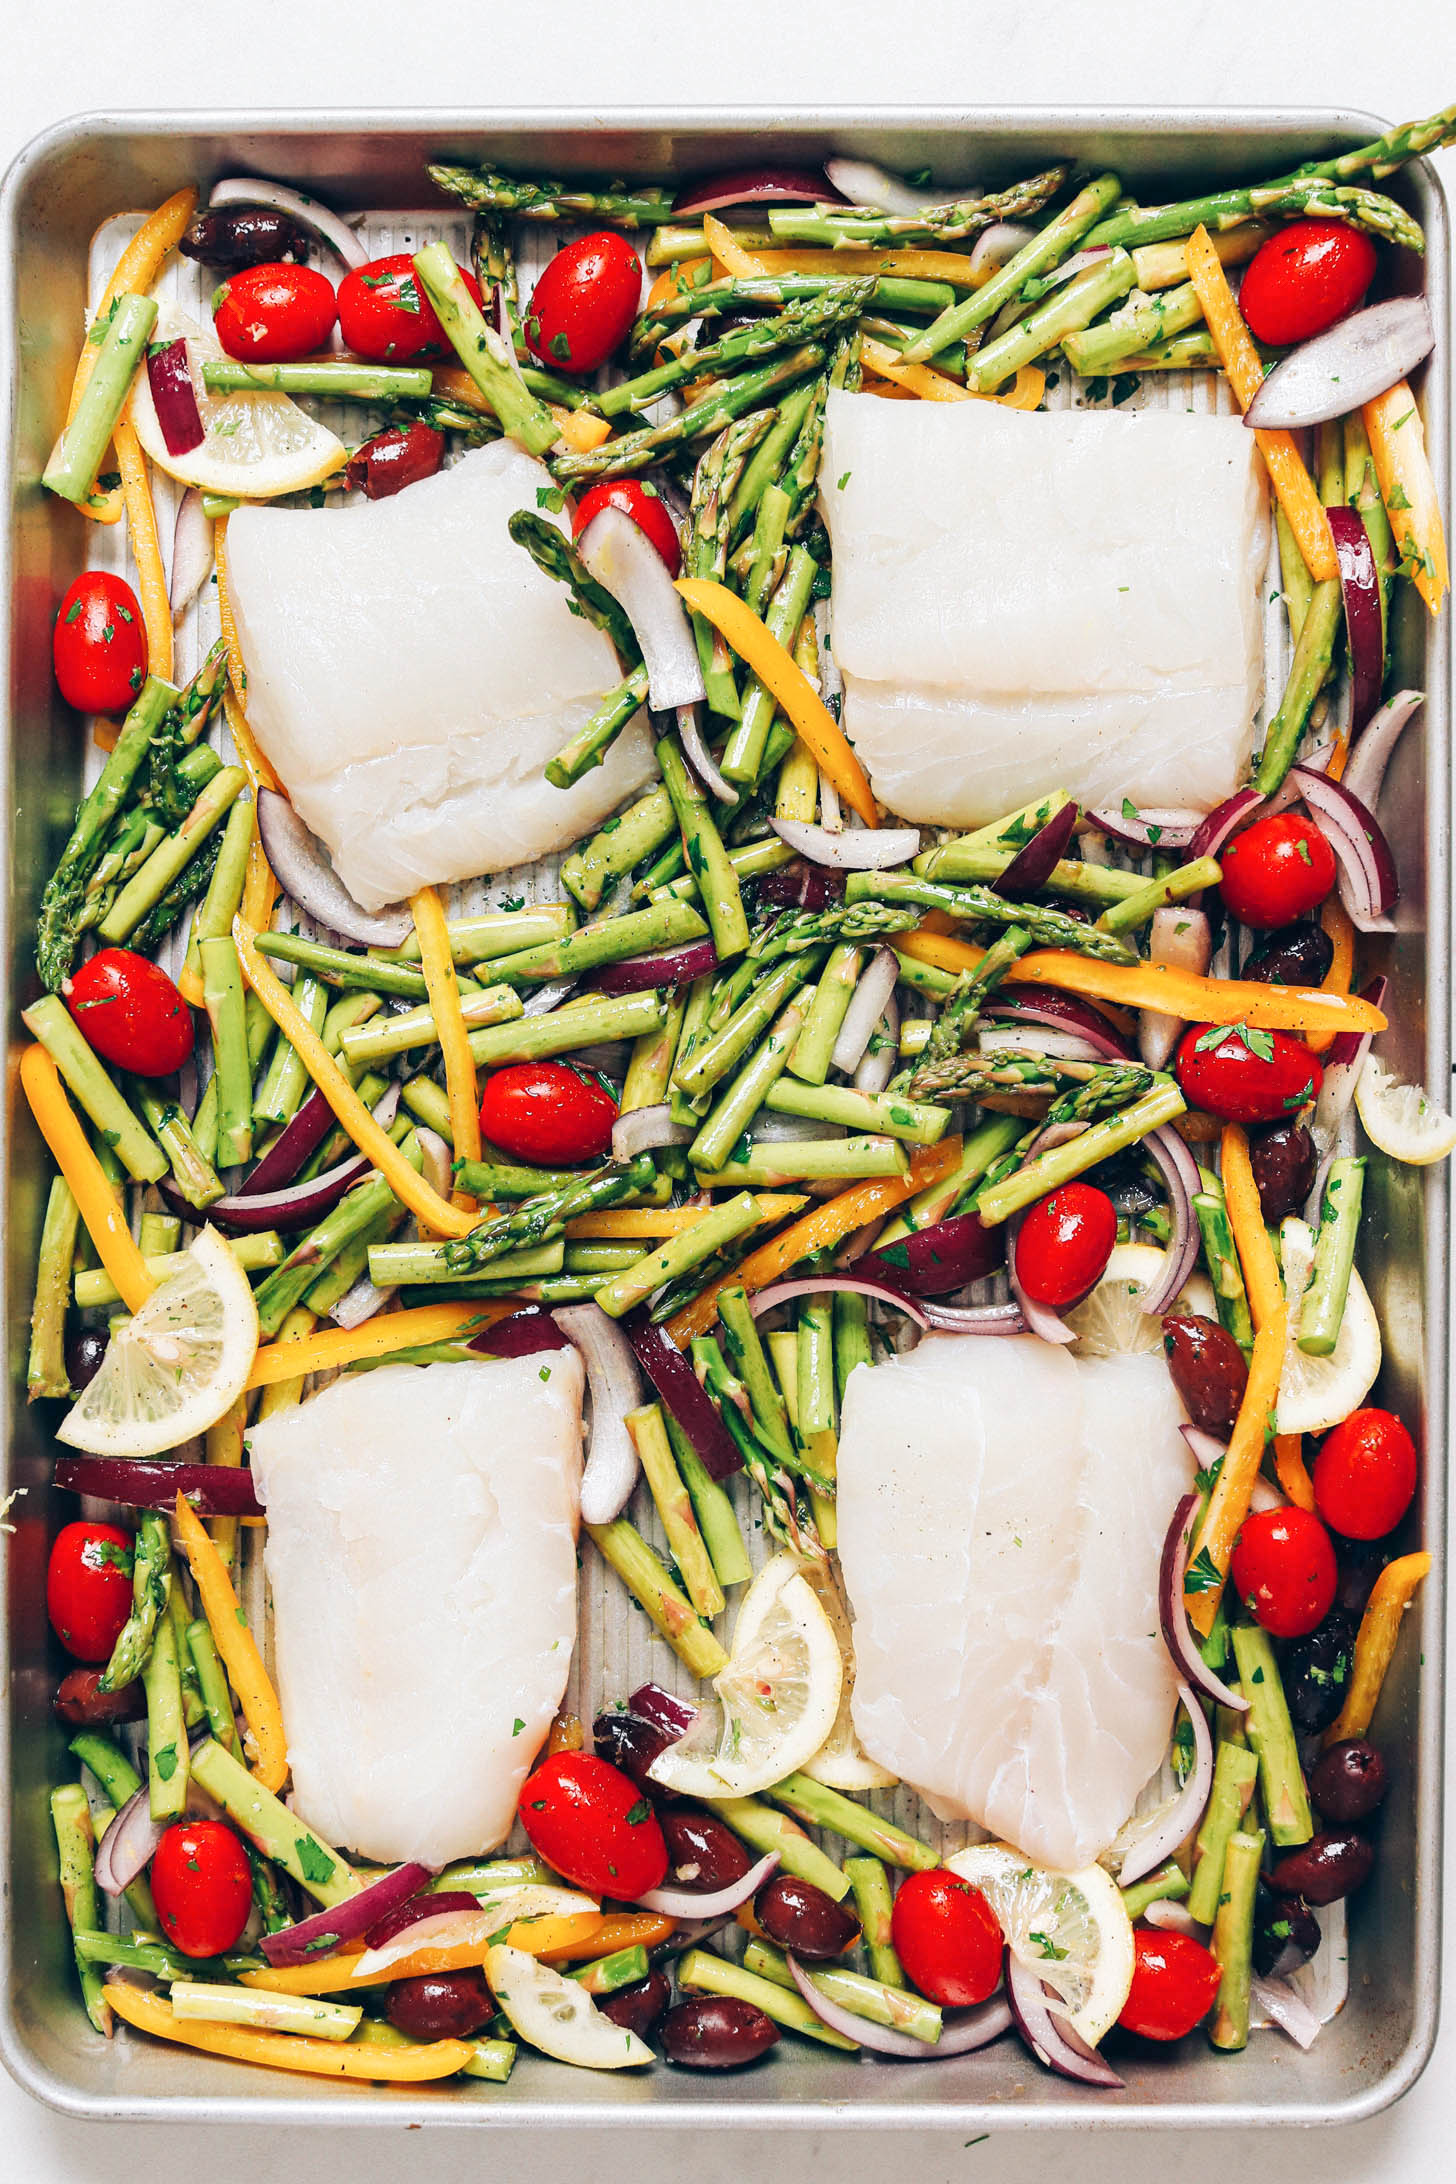 Sheet pan meal of baked cod fillets and vegetables